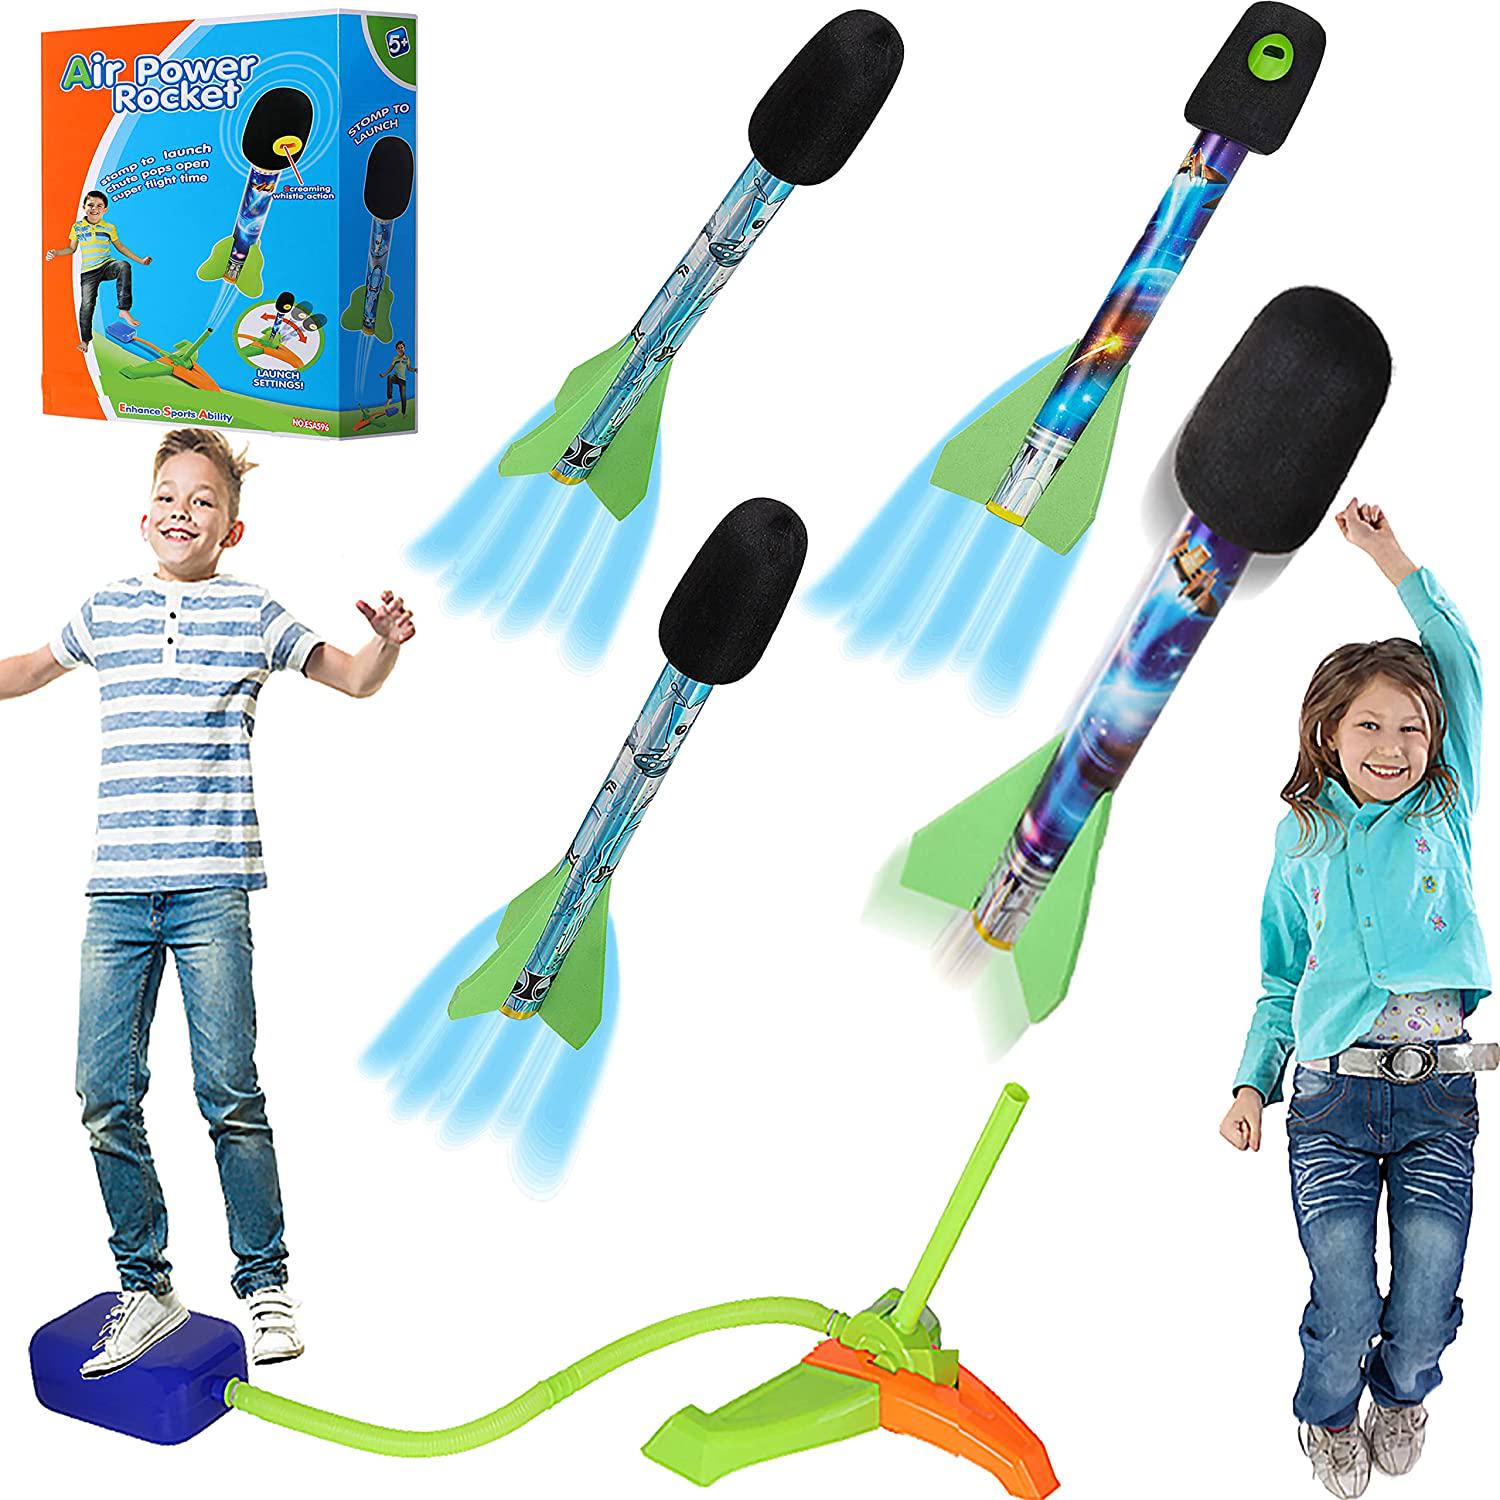 Lamsion, Lamsion Rocket Launchers for Kids, Outdoor Jump Rocket Launchers Toys with 4 Foam Rockets and Air Rocket Launcher for Kids Ages 3+ Stomp and Launch